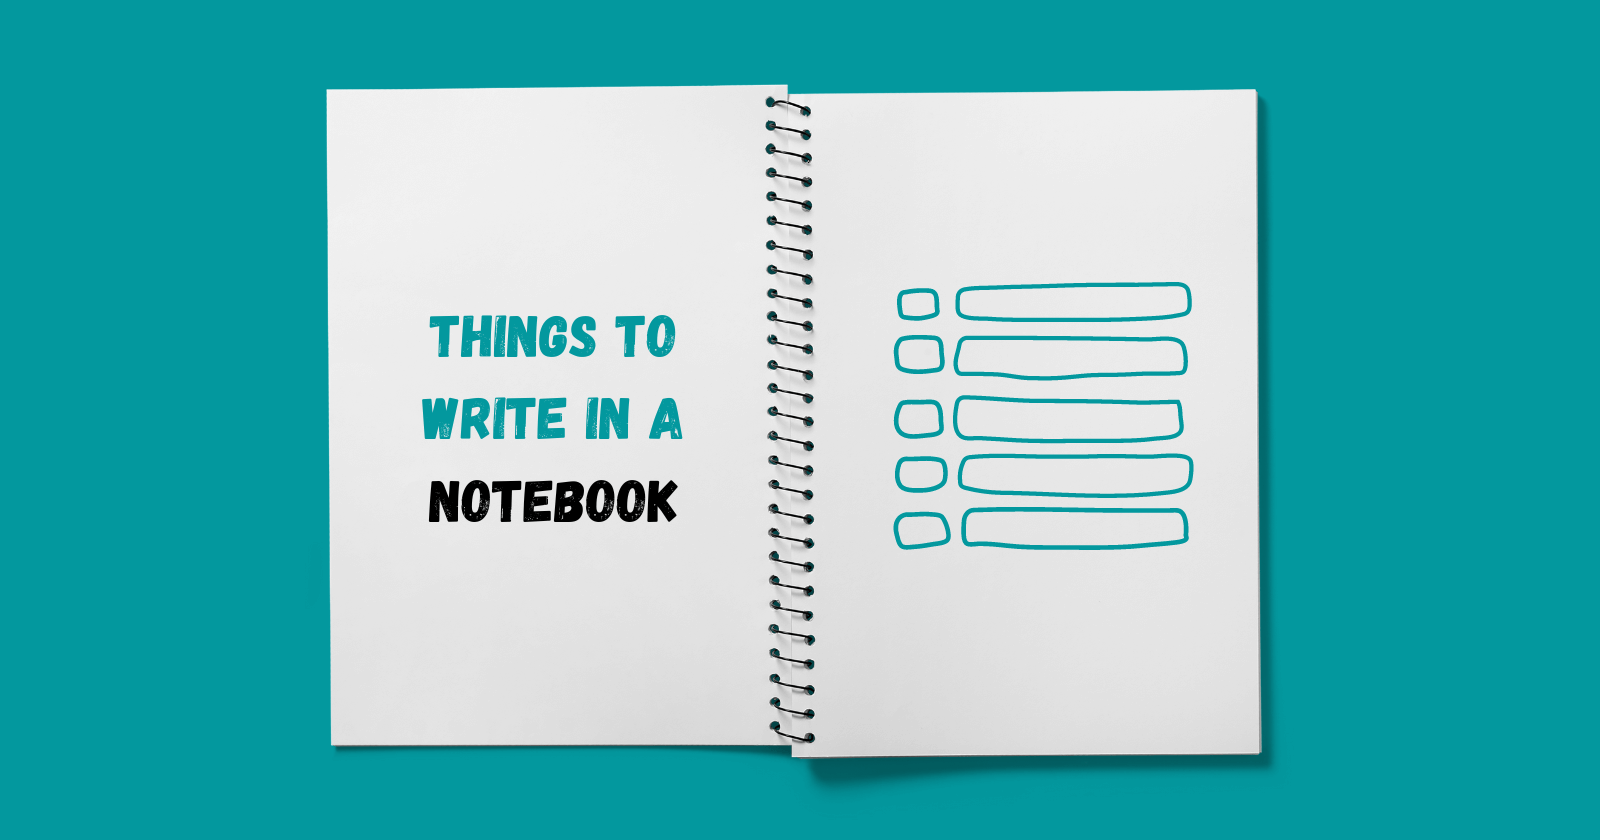 Things to Write in a Notebook